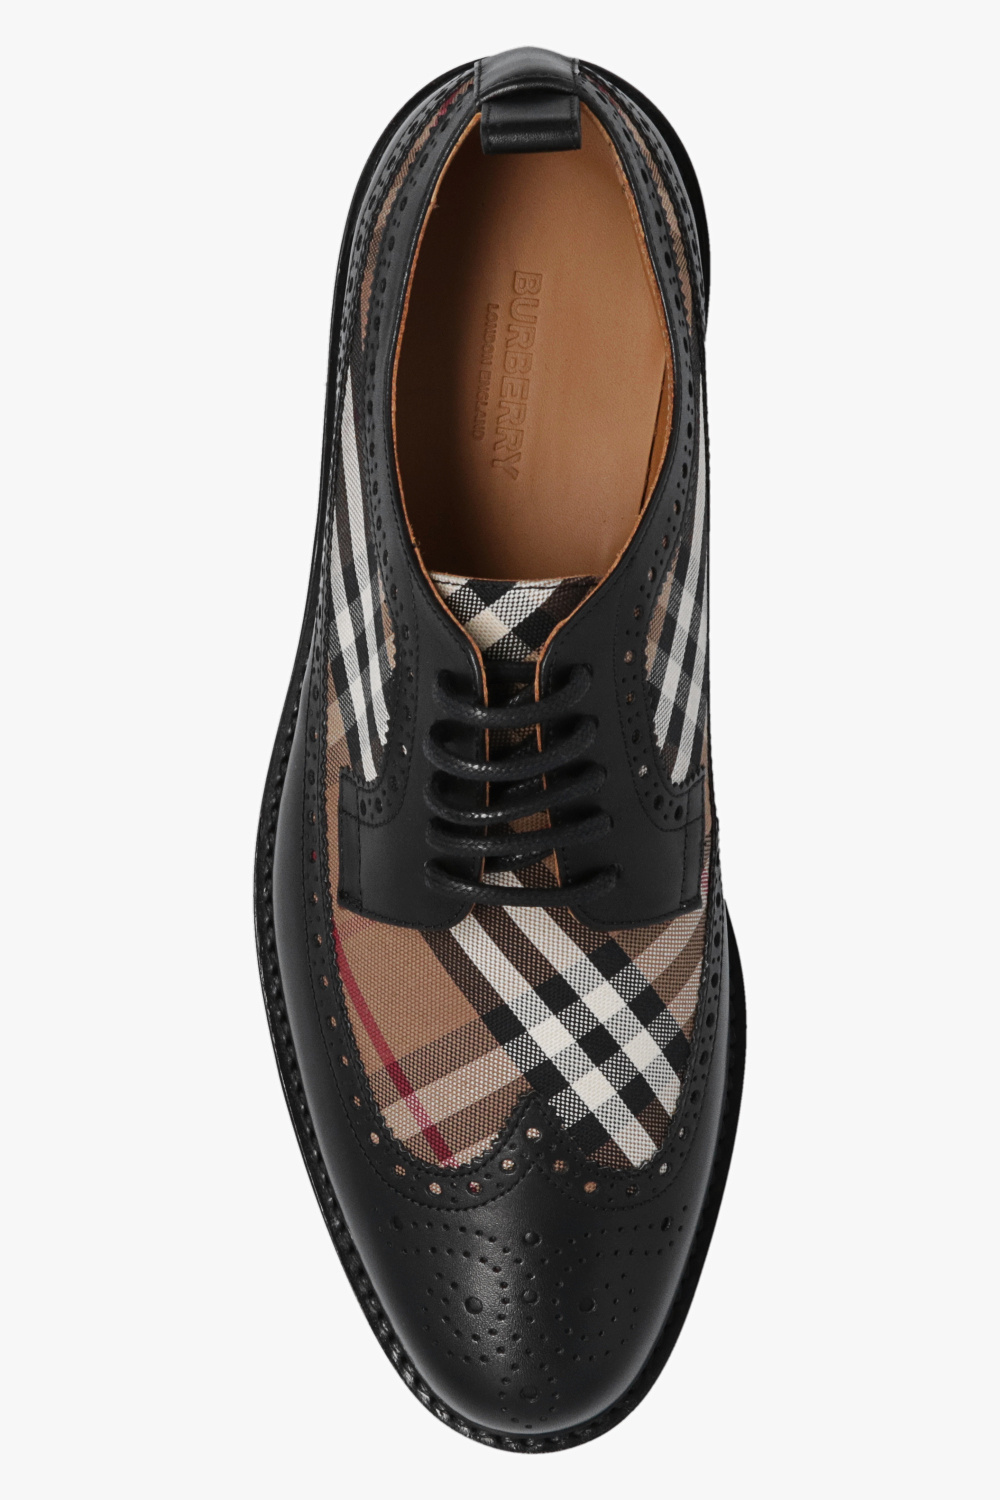 Burberry ‘New Arndale’ Derby shoes